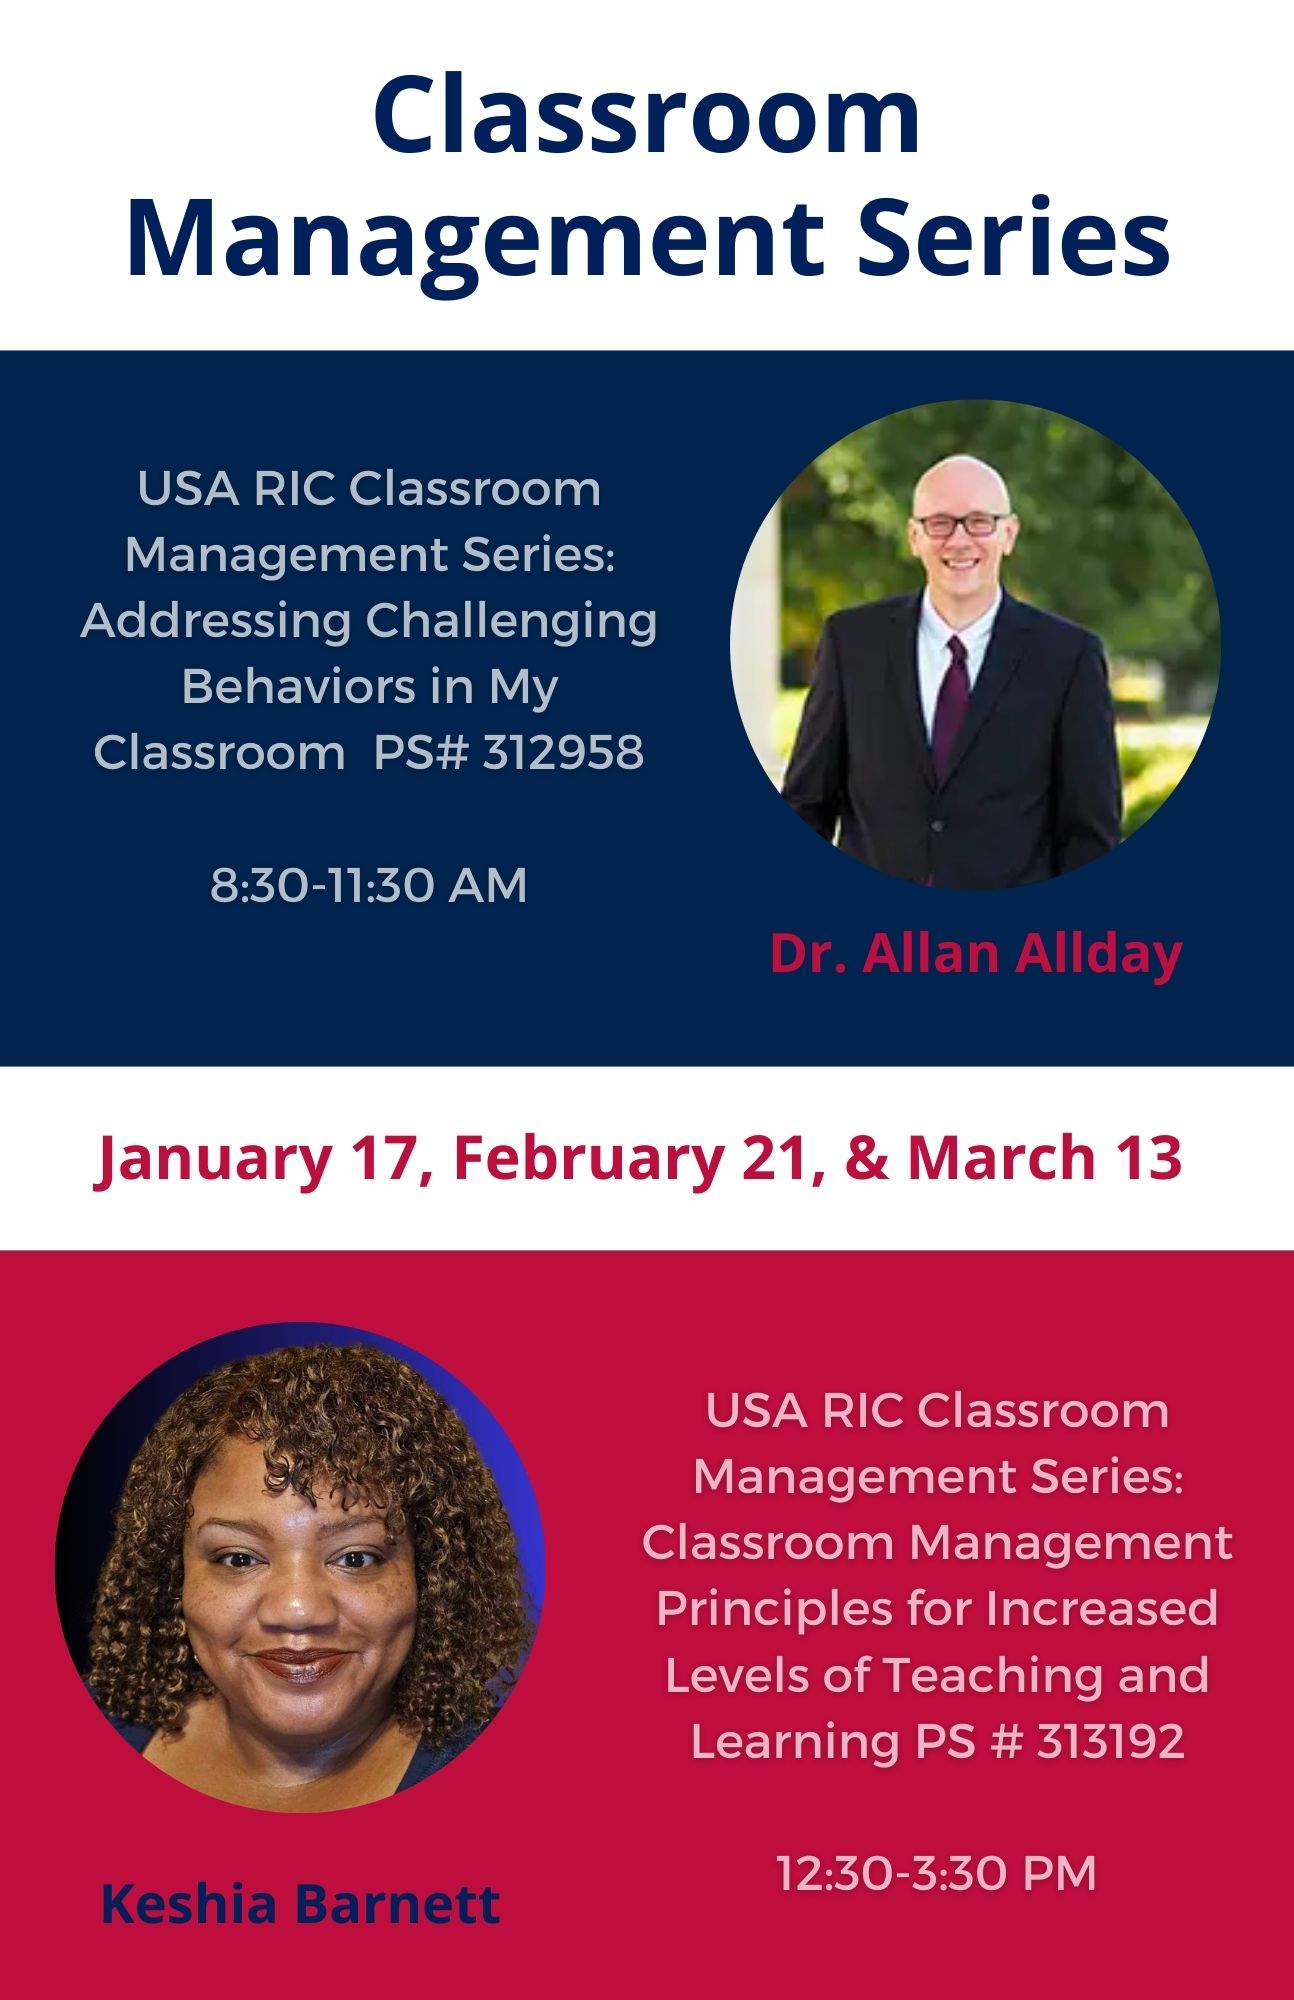 Flier for the Classroom Managment Series featuring photos of Dr. Allan Allday and Ms. Keshia Barnett with their respective course titles.